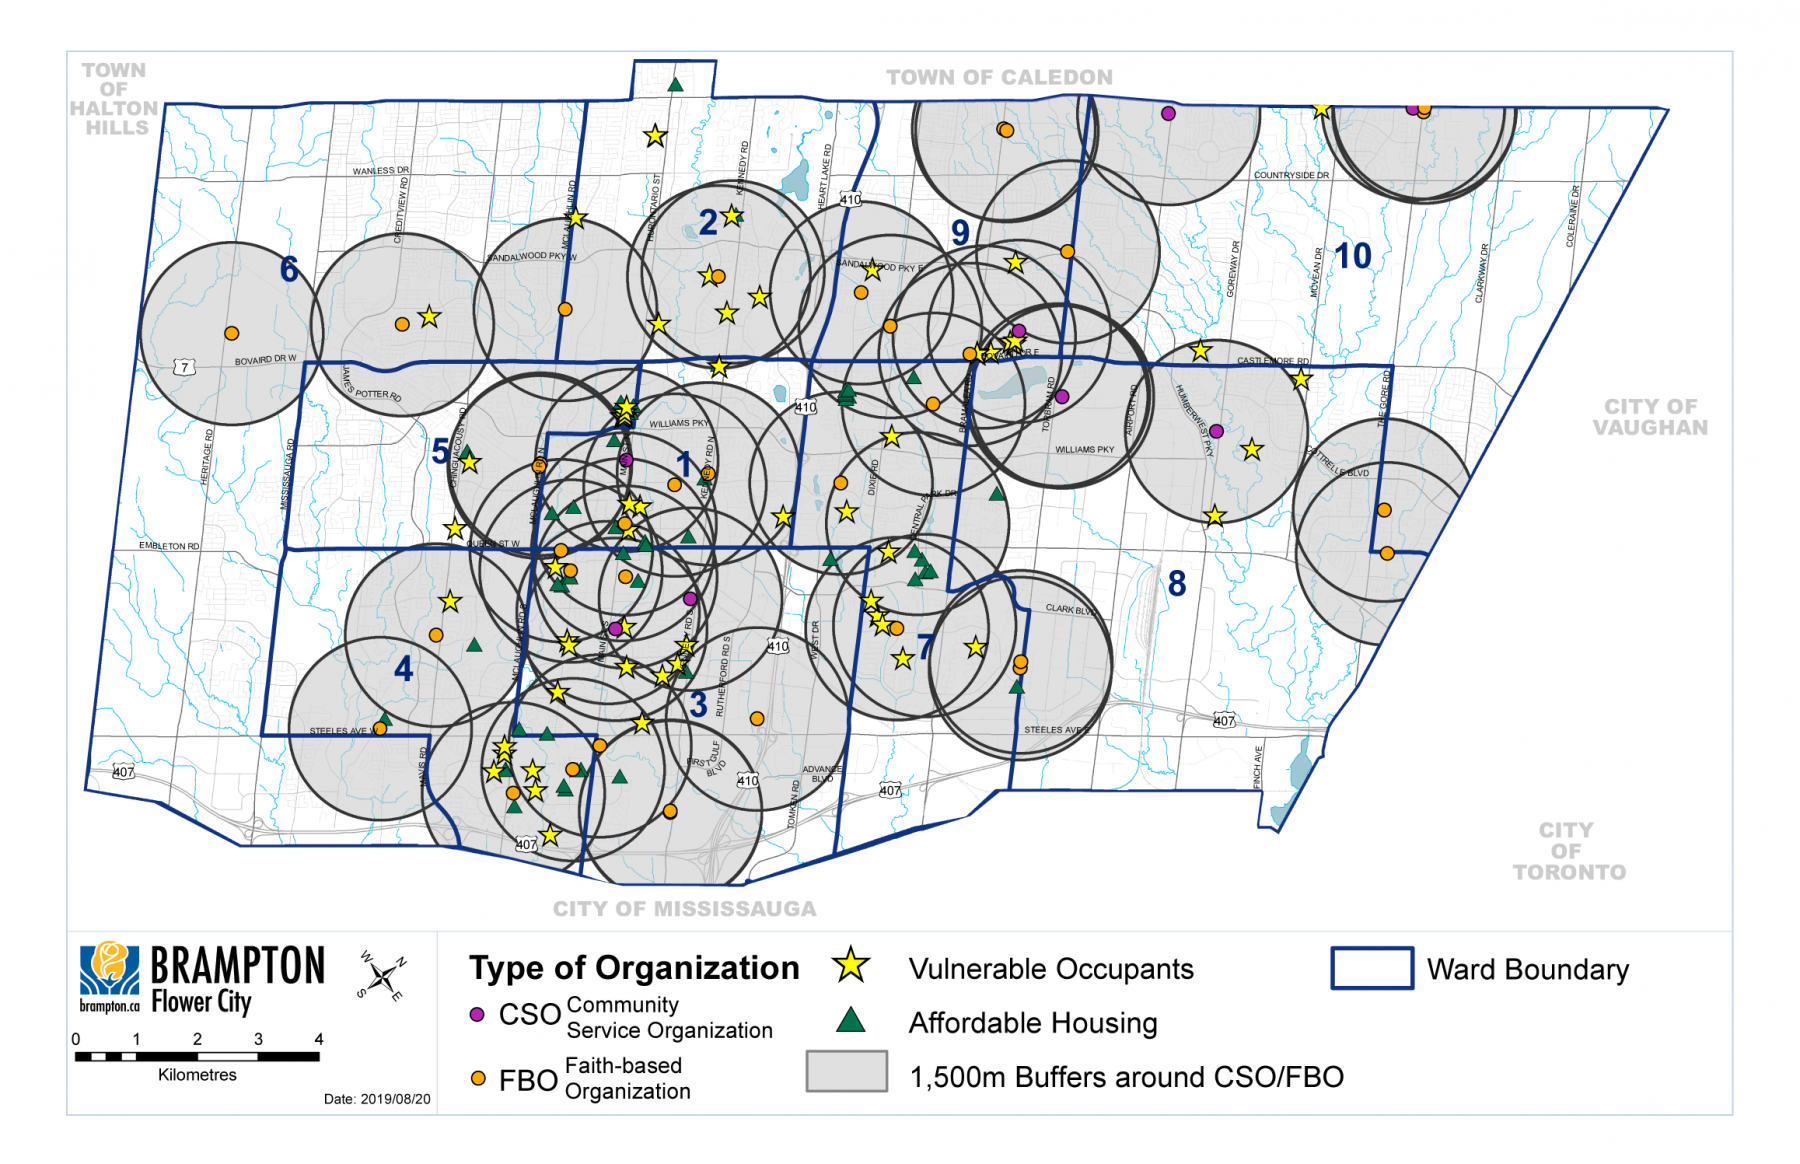 A map showing the location of the substantial facilities owned by Faith Based Organizations in Brampton, Ontario. These facilities are located close to known vulnerable populations, making them very useful during extreme weather events.